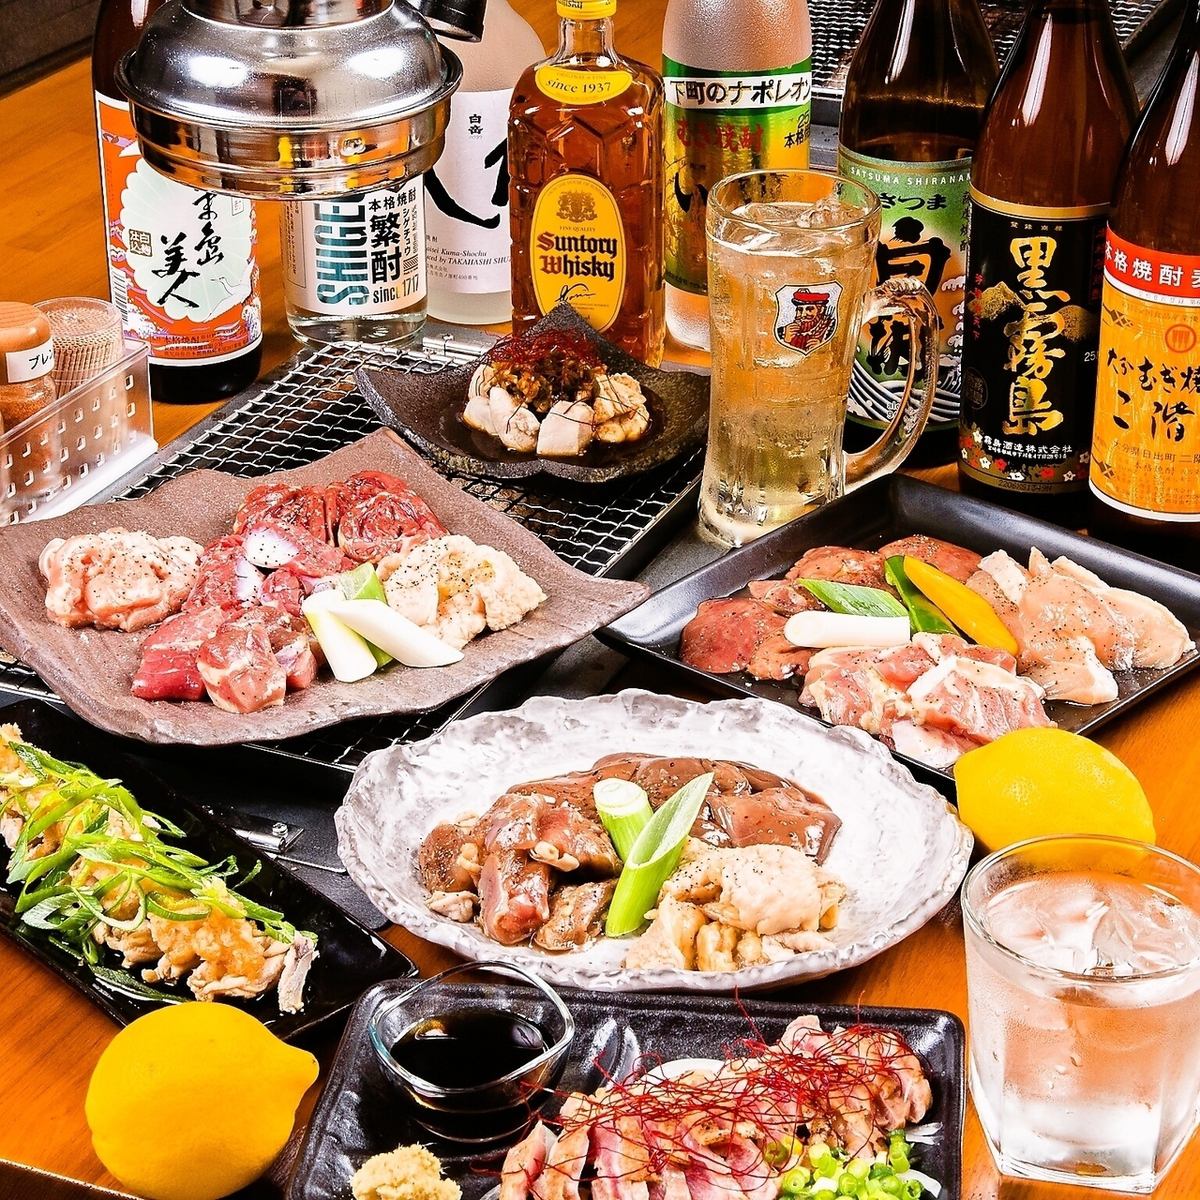 A charcoal-grilled chicken yakiniku restaurant that you can enjoy in a private space.